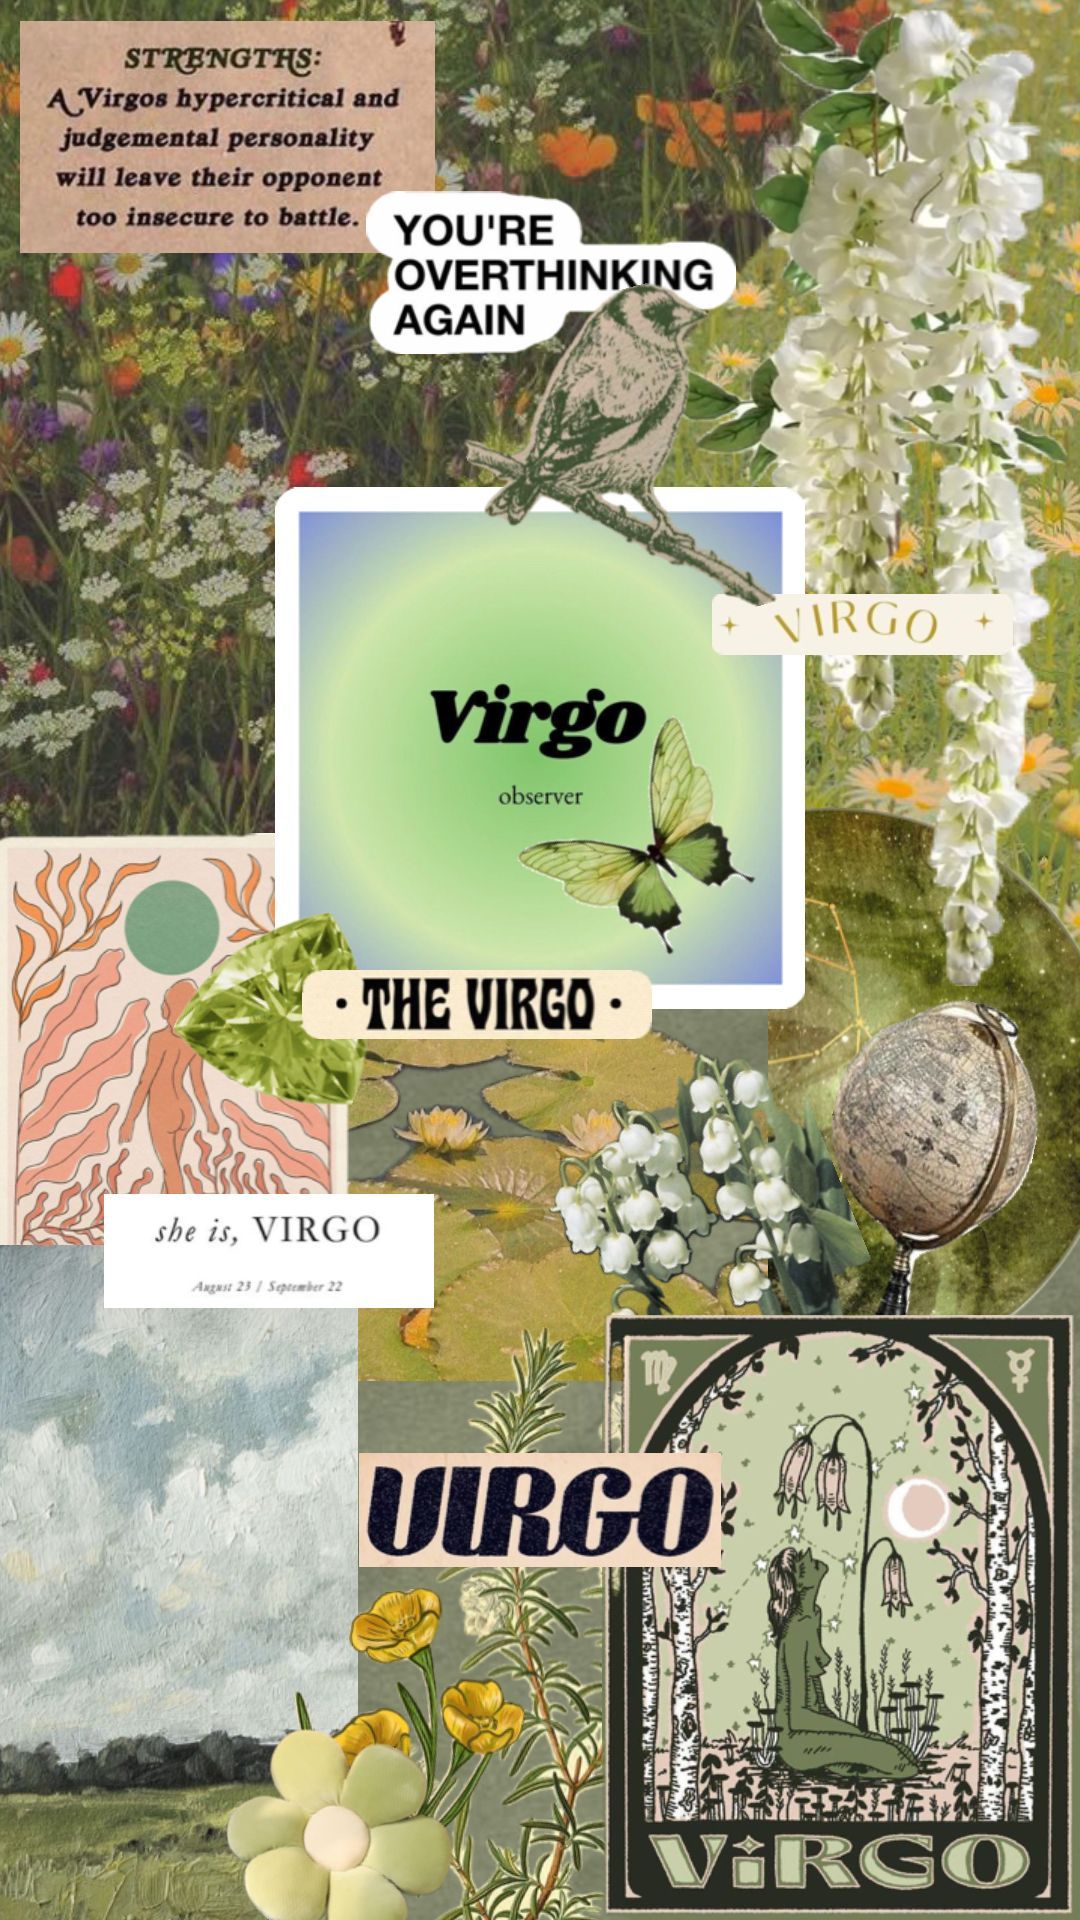 A collage of Virgo imagery including flowers, a butterfly, and a green Virgo sign. - Virgo